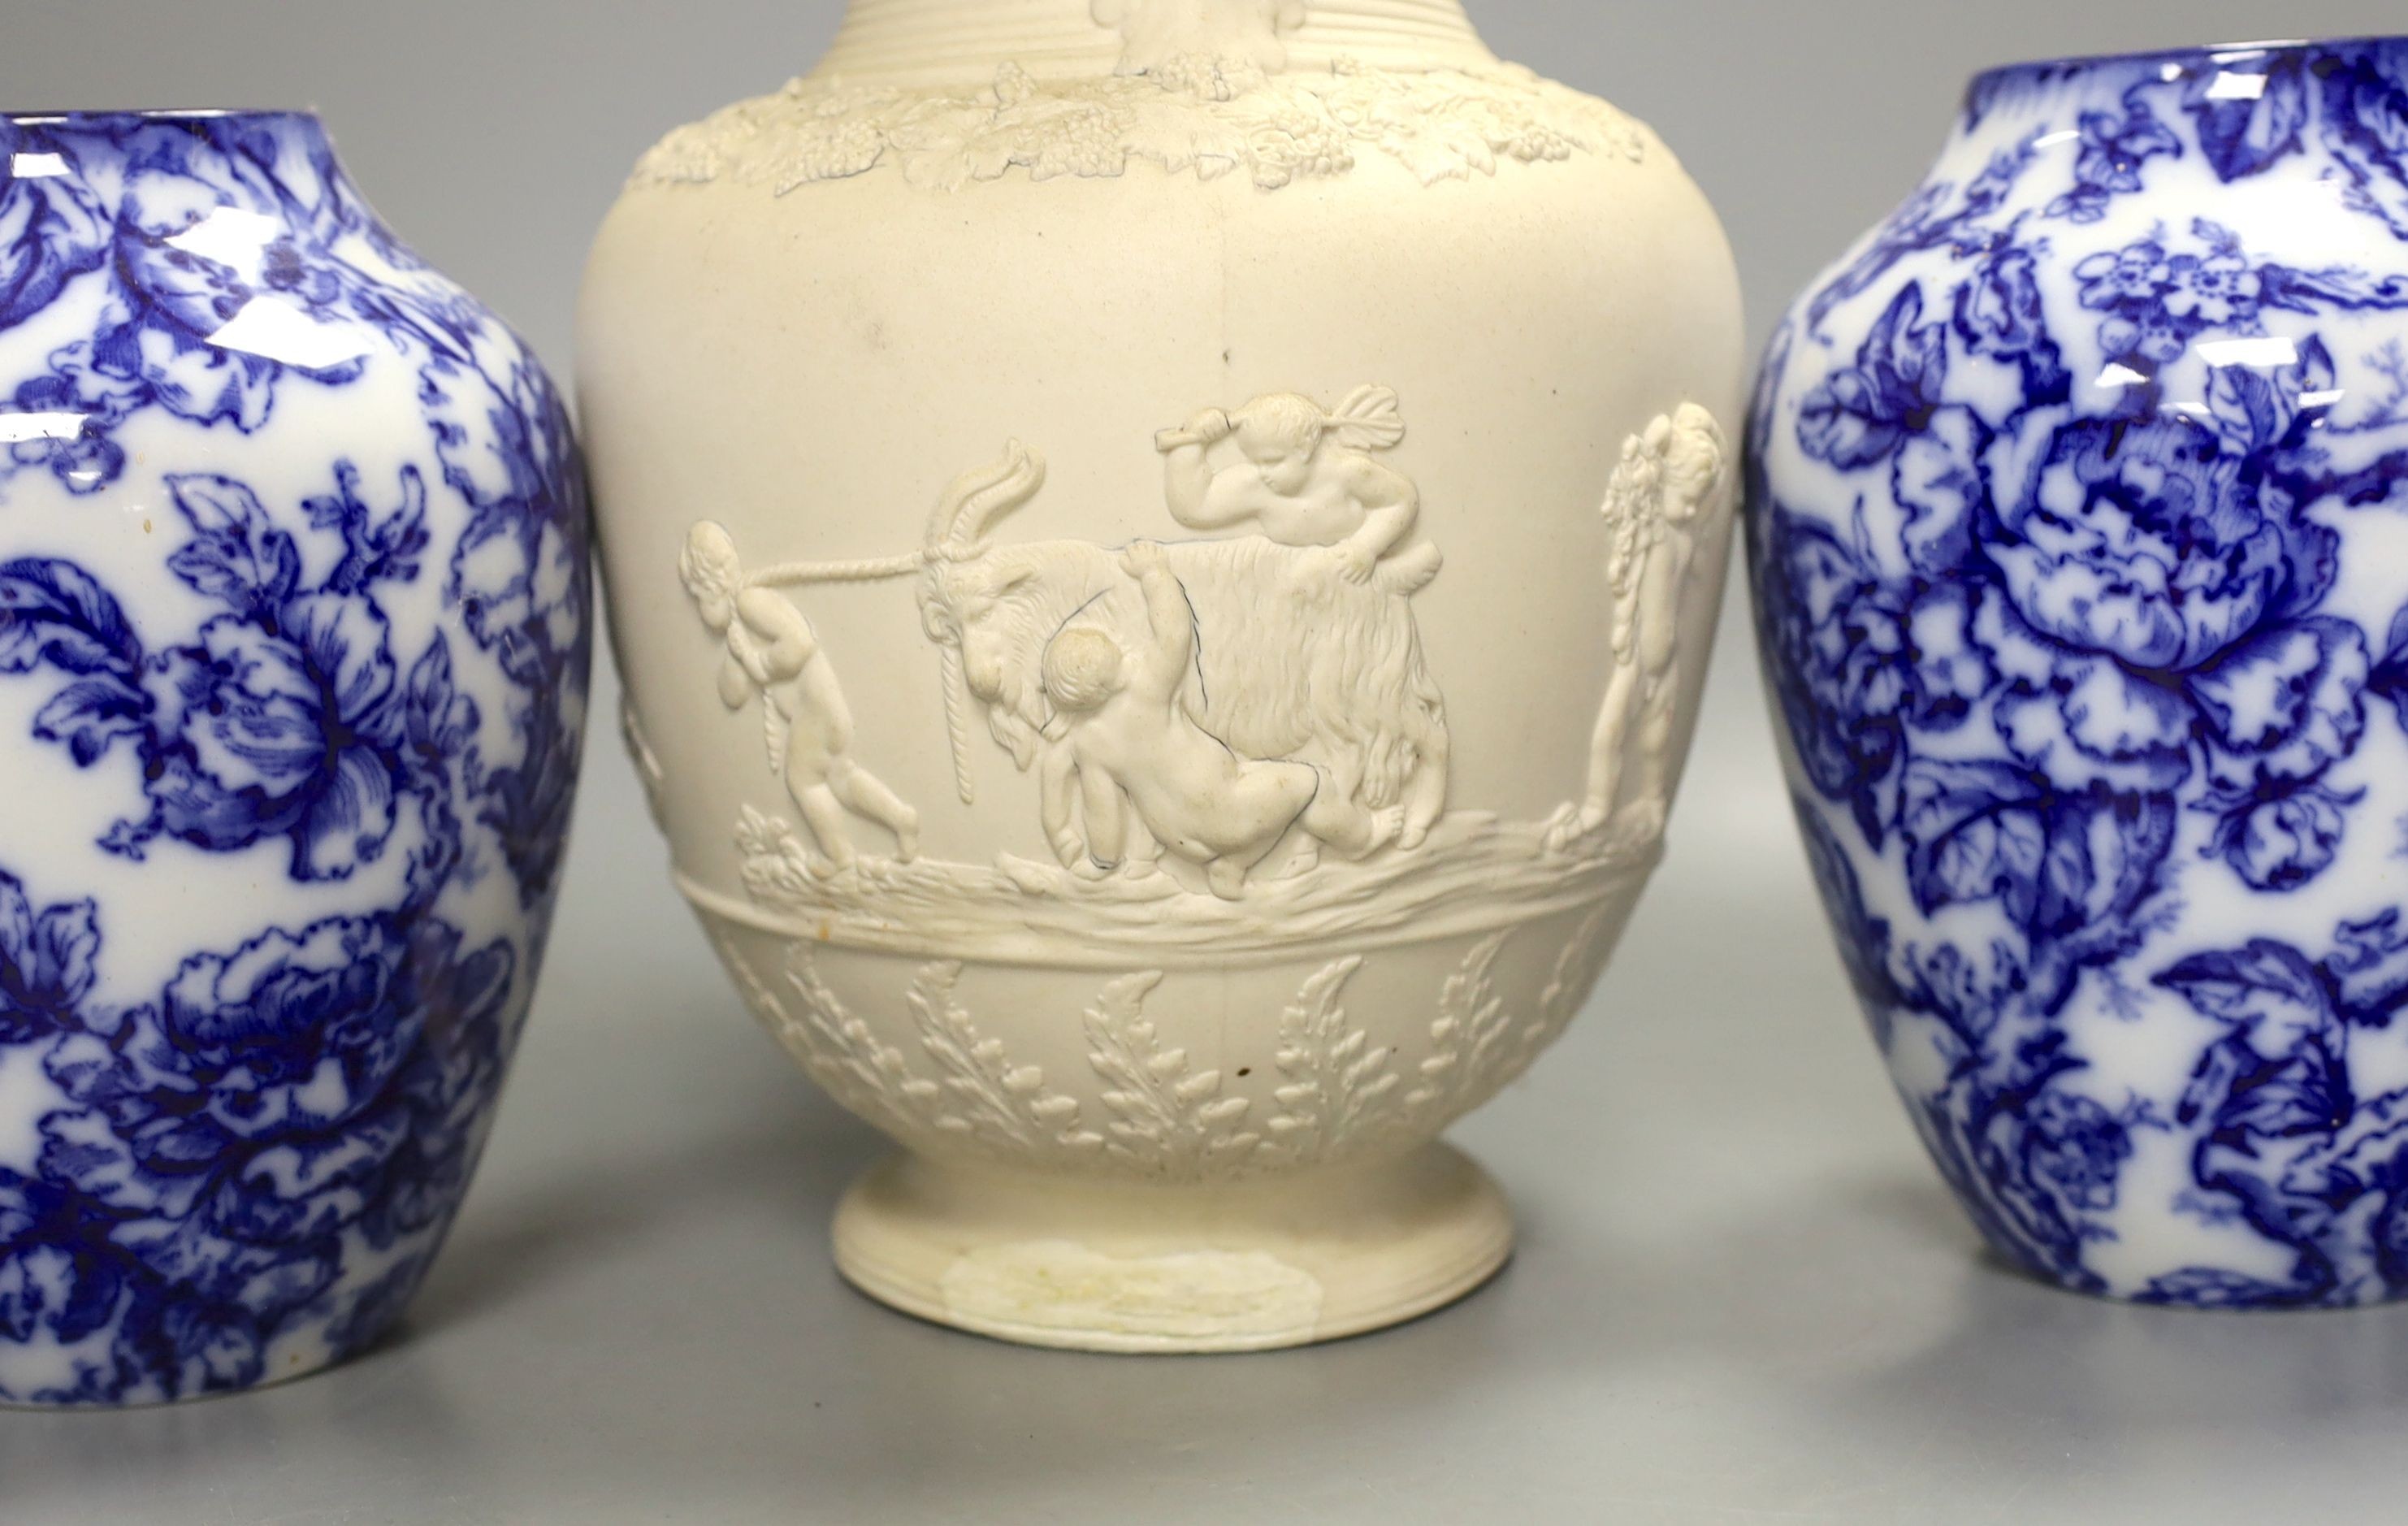 A pair of Keelings blue and white floral vases and a 19th century relief moulded white stoneware jug, vases 17 cms high.